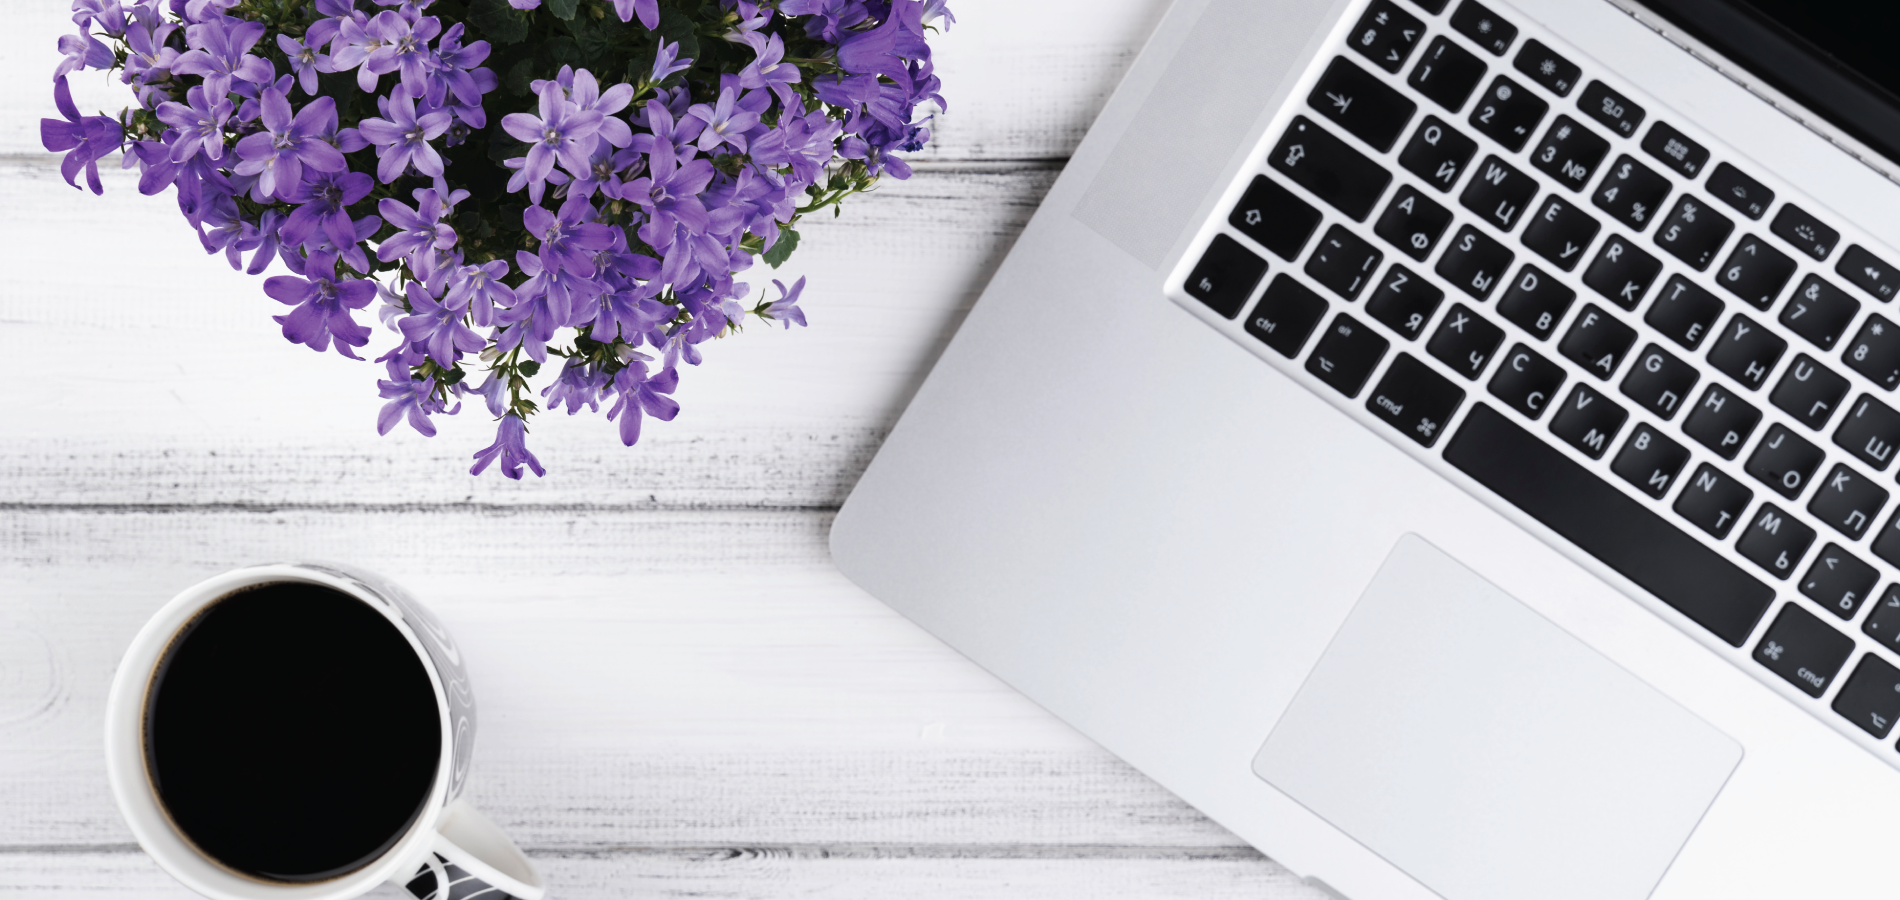 image of purple flowers, a coffee cup, and a laptop